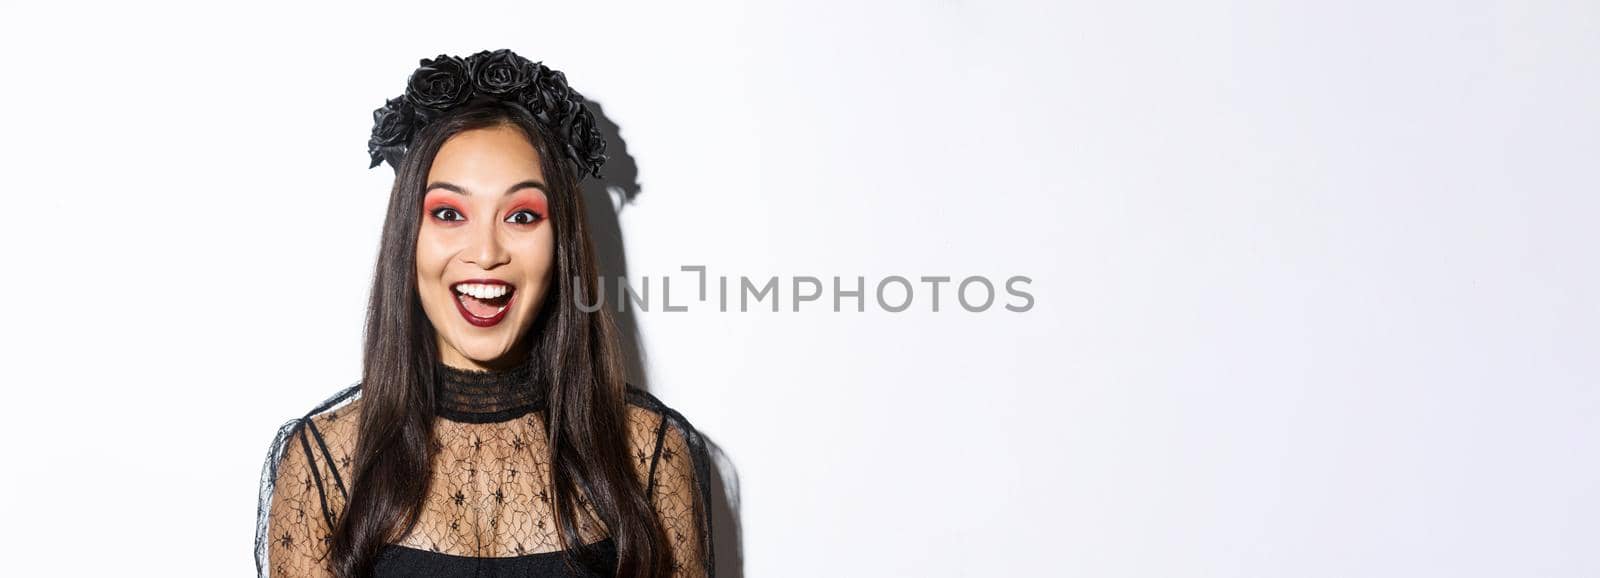 Close-up of enthusiastic asian woman looking amused, wearing witch costume on halloween, standing over white background.